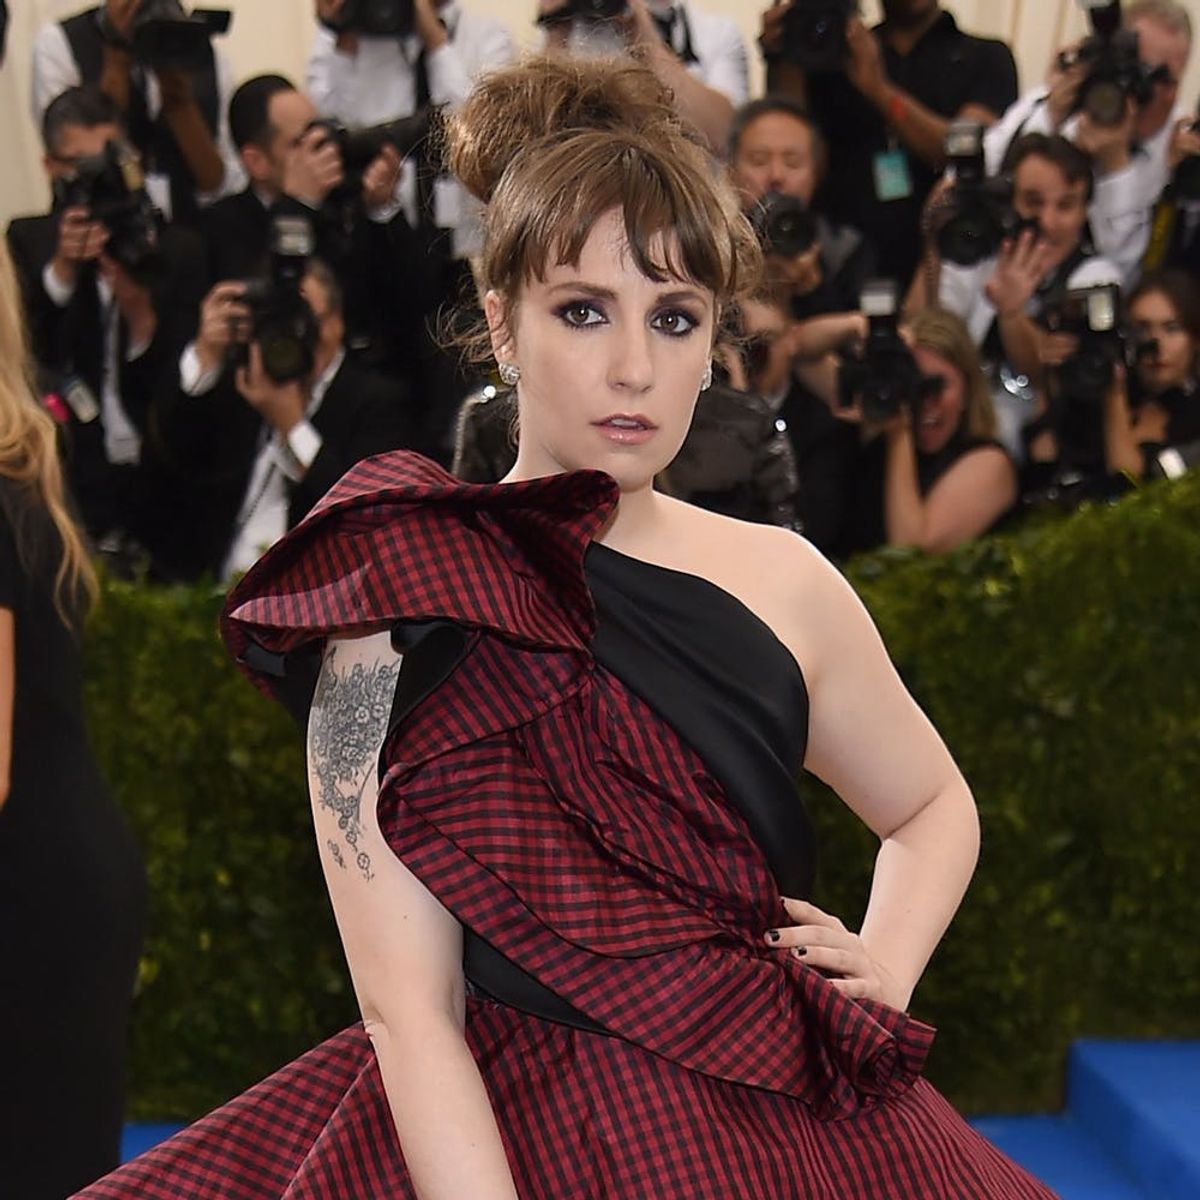 Lena Dunham Opens Up About Her Decision to Have a Hysterectomy at 31